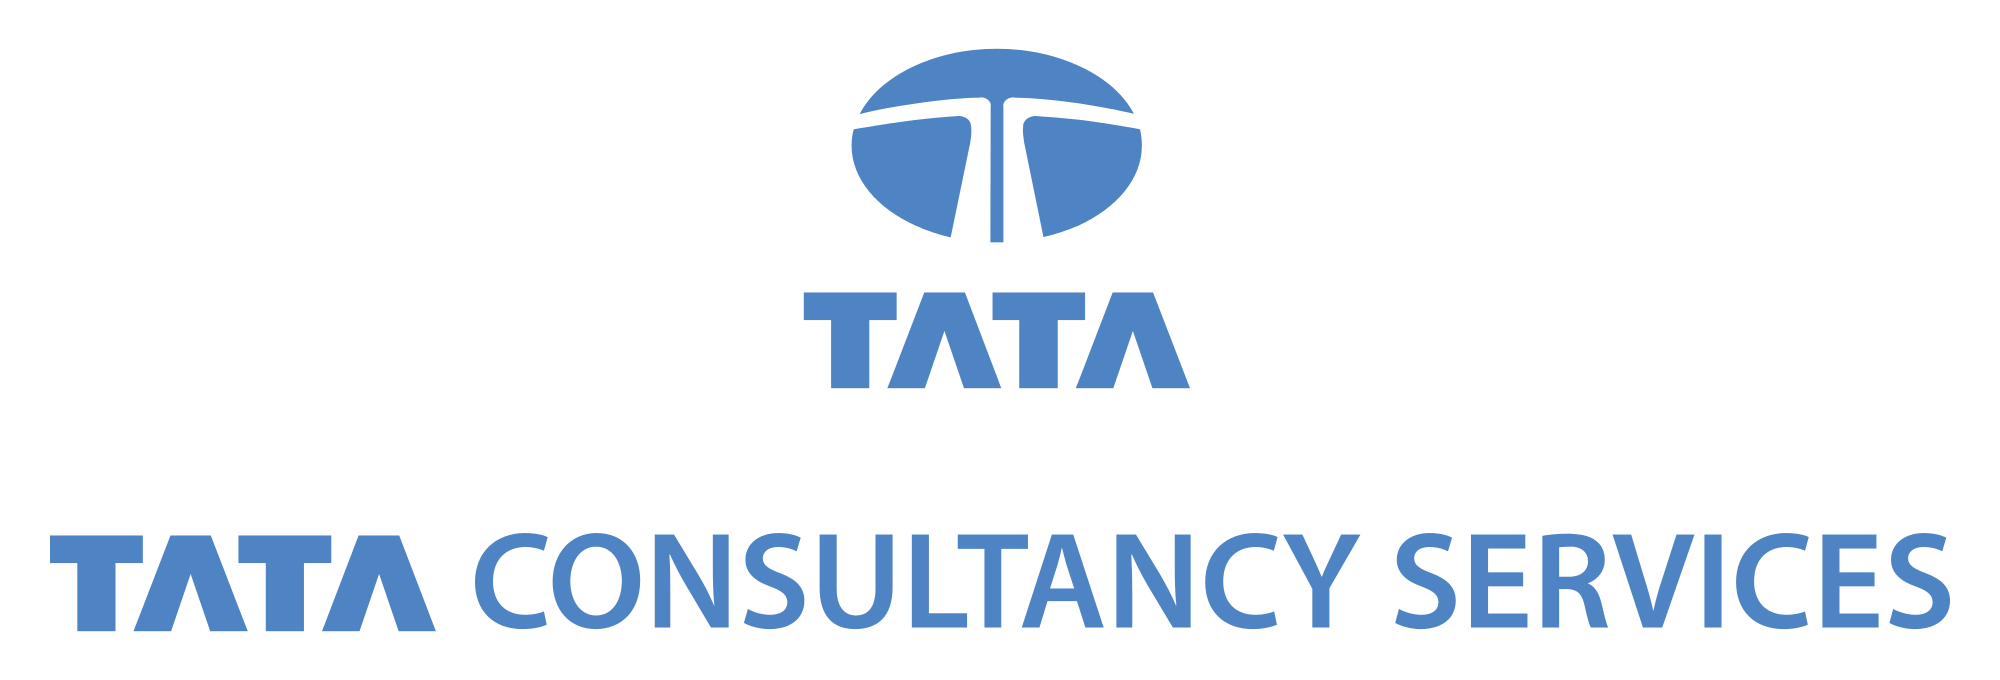 TCS Logo - File:TATA Consultancy Services Logo blue.svg - Wikimedia Commons